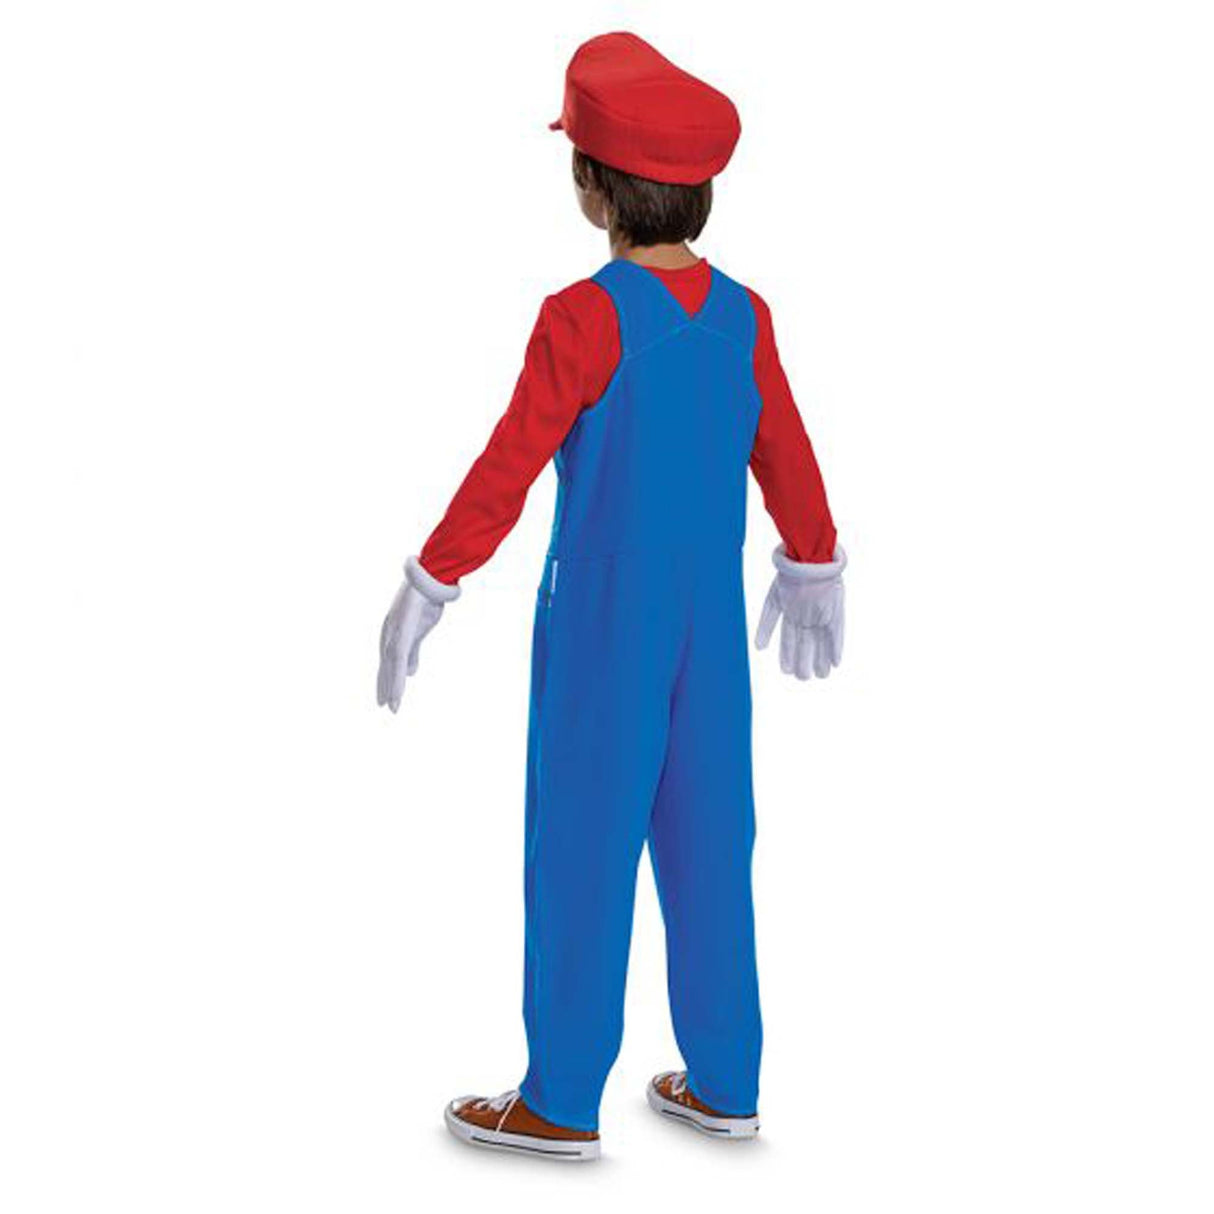 DISGUISE (TOY-SPORT) Costumes Super Mario Overalls Costume for Kids, Blue Overalls